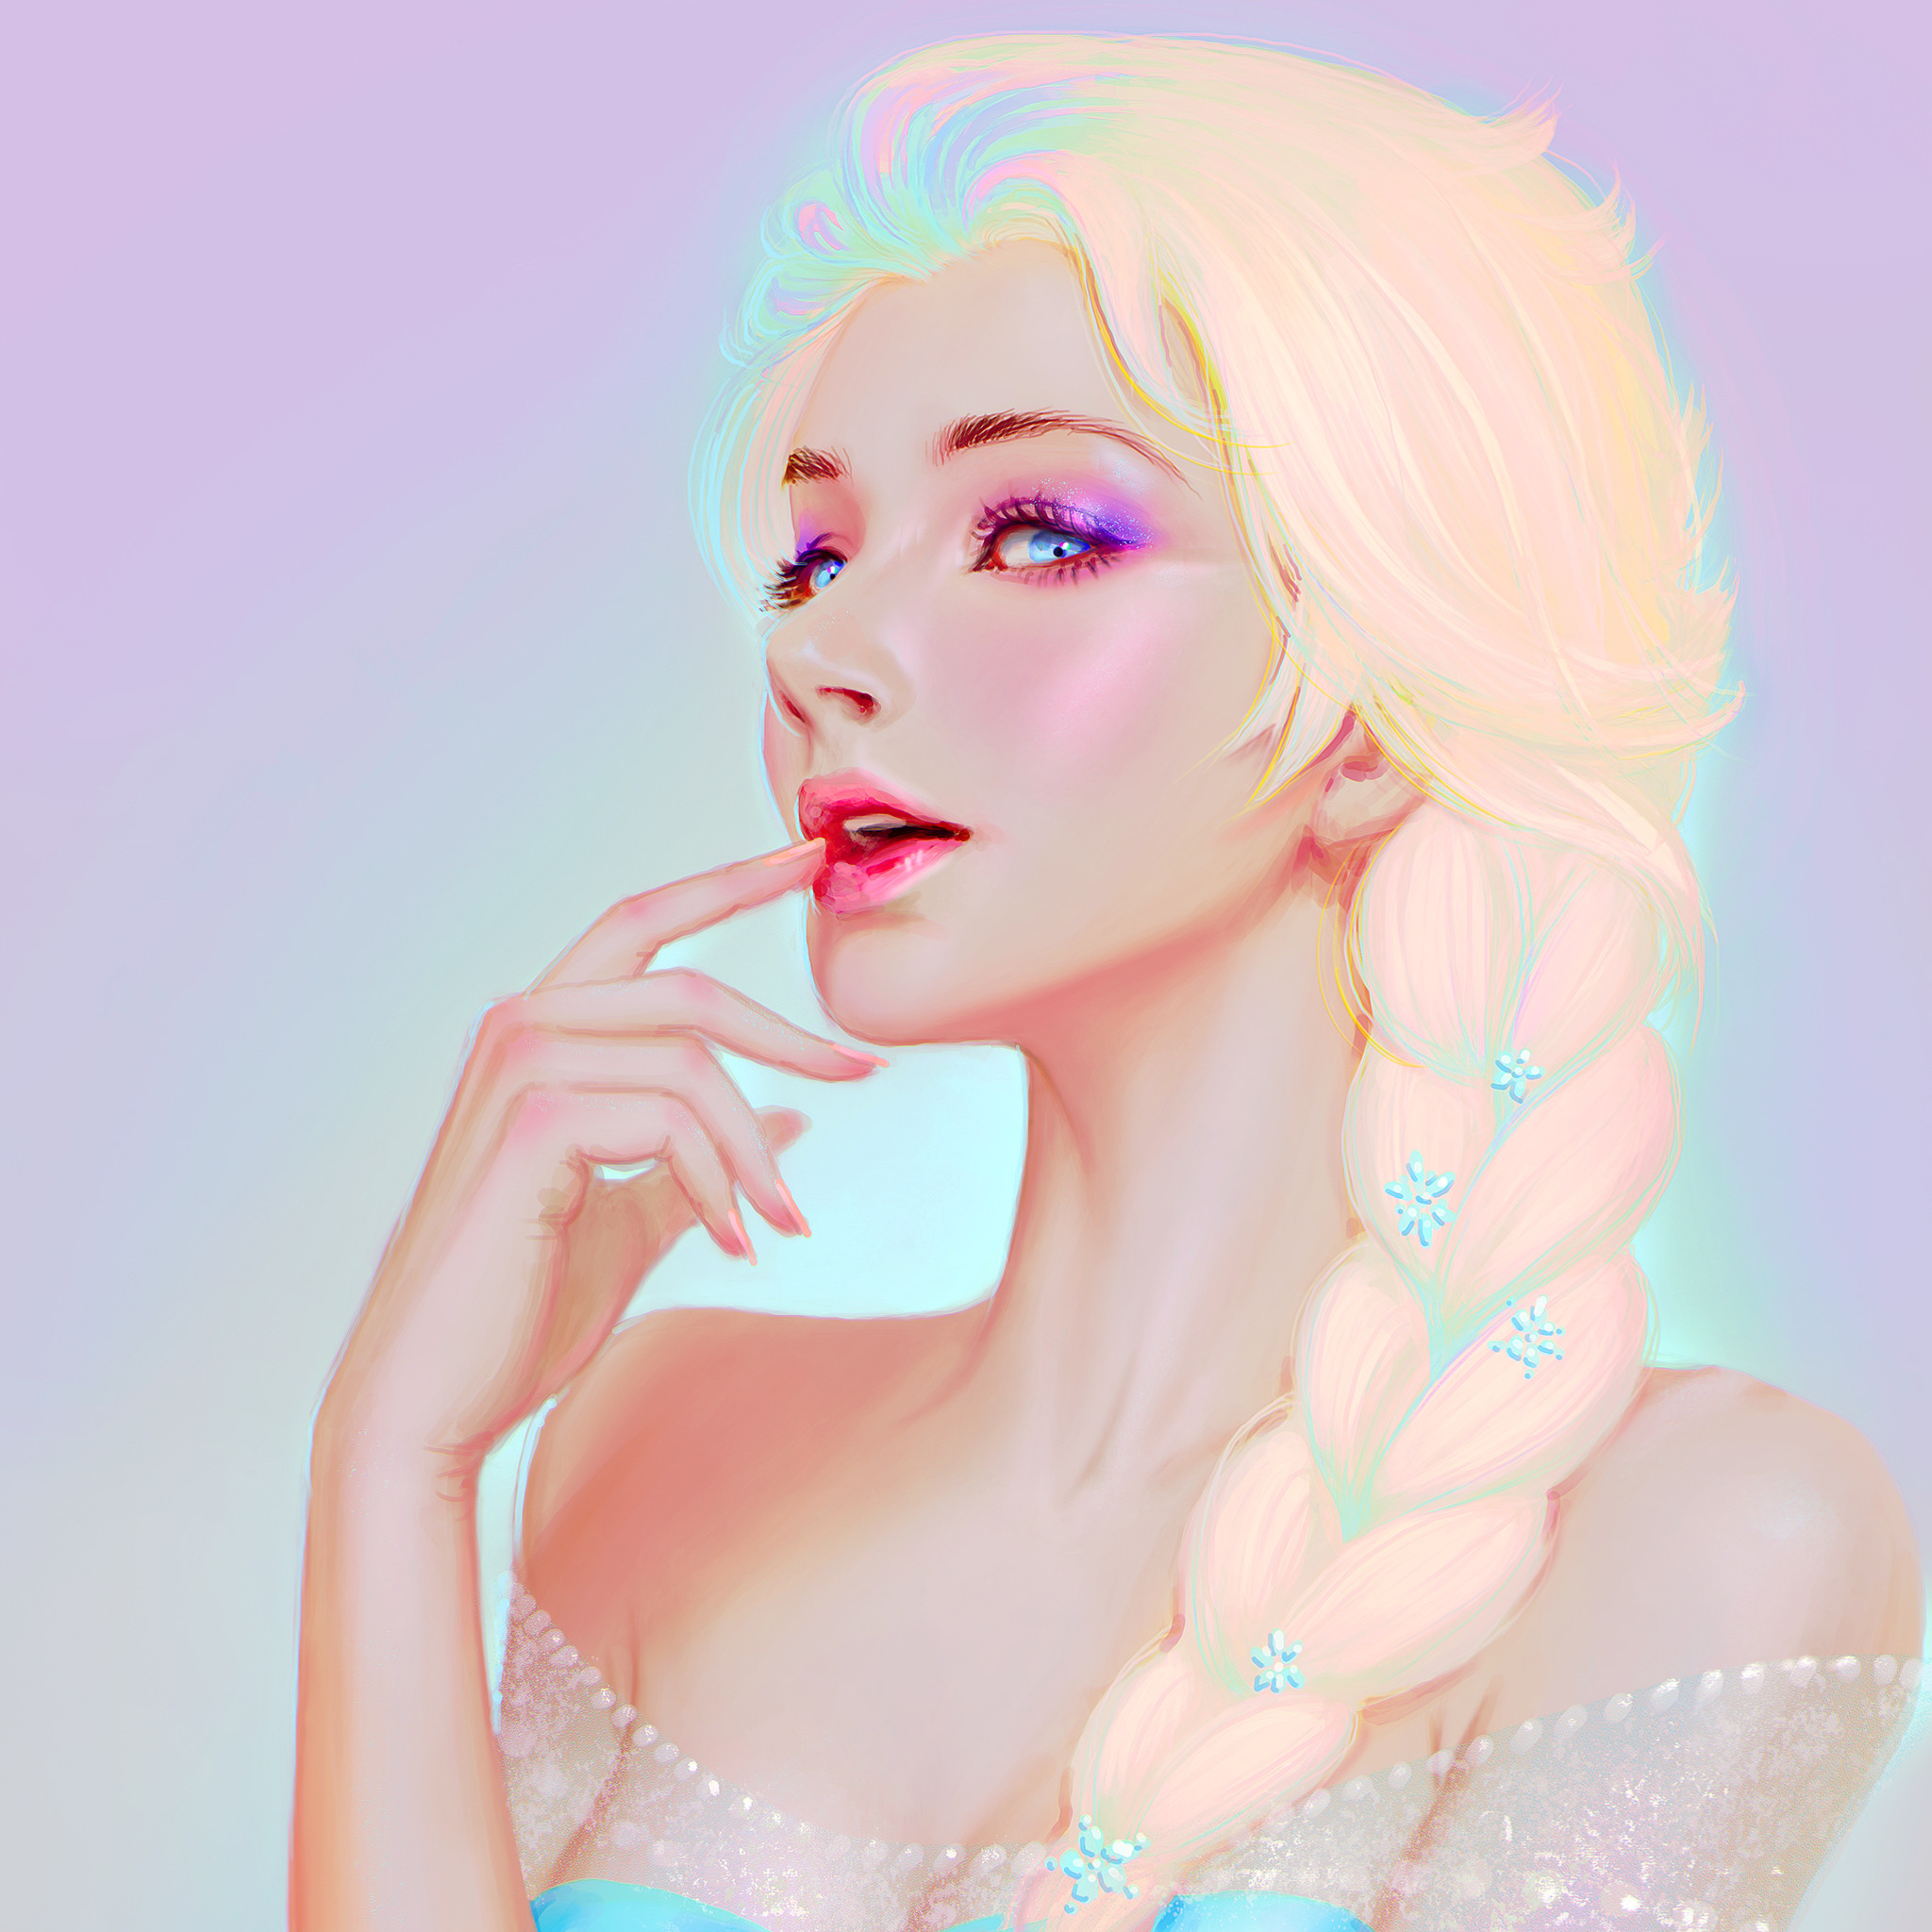 LightBox Young Woman Women Fan Art Elsa Digital Painting Looking At Viewer Blonde Open Mouth Blond H 2048x2048